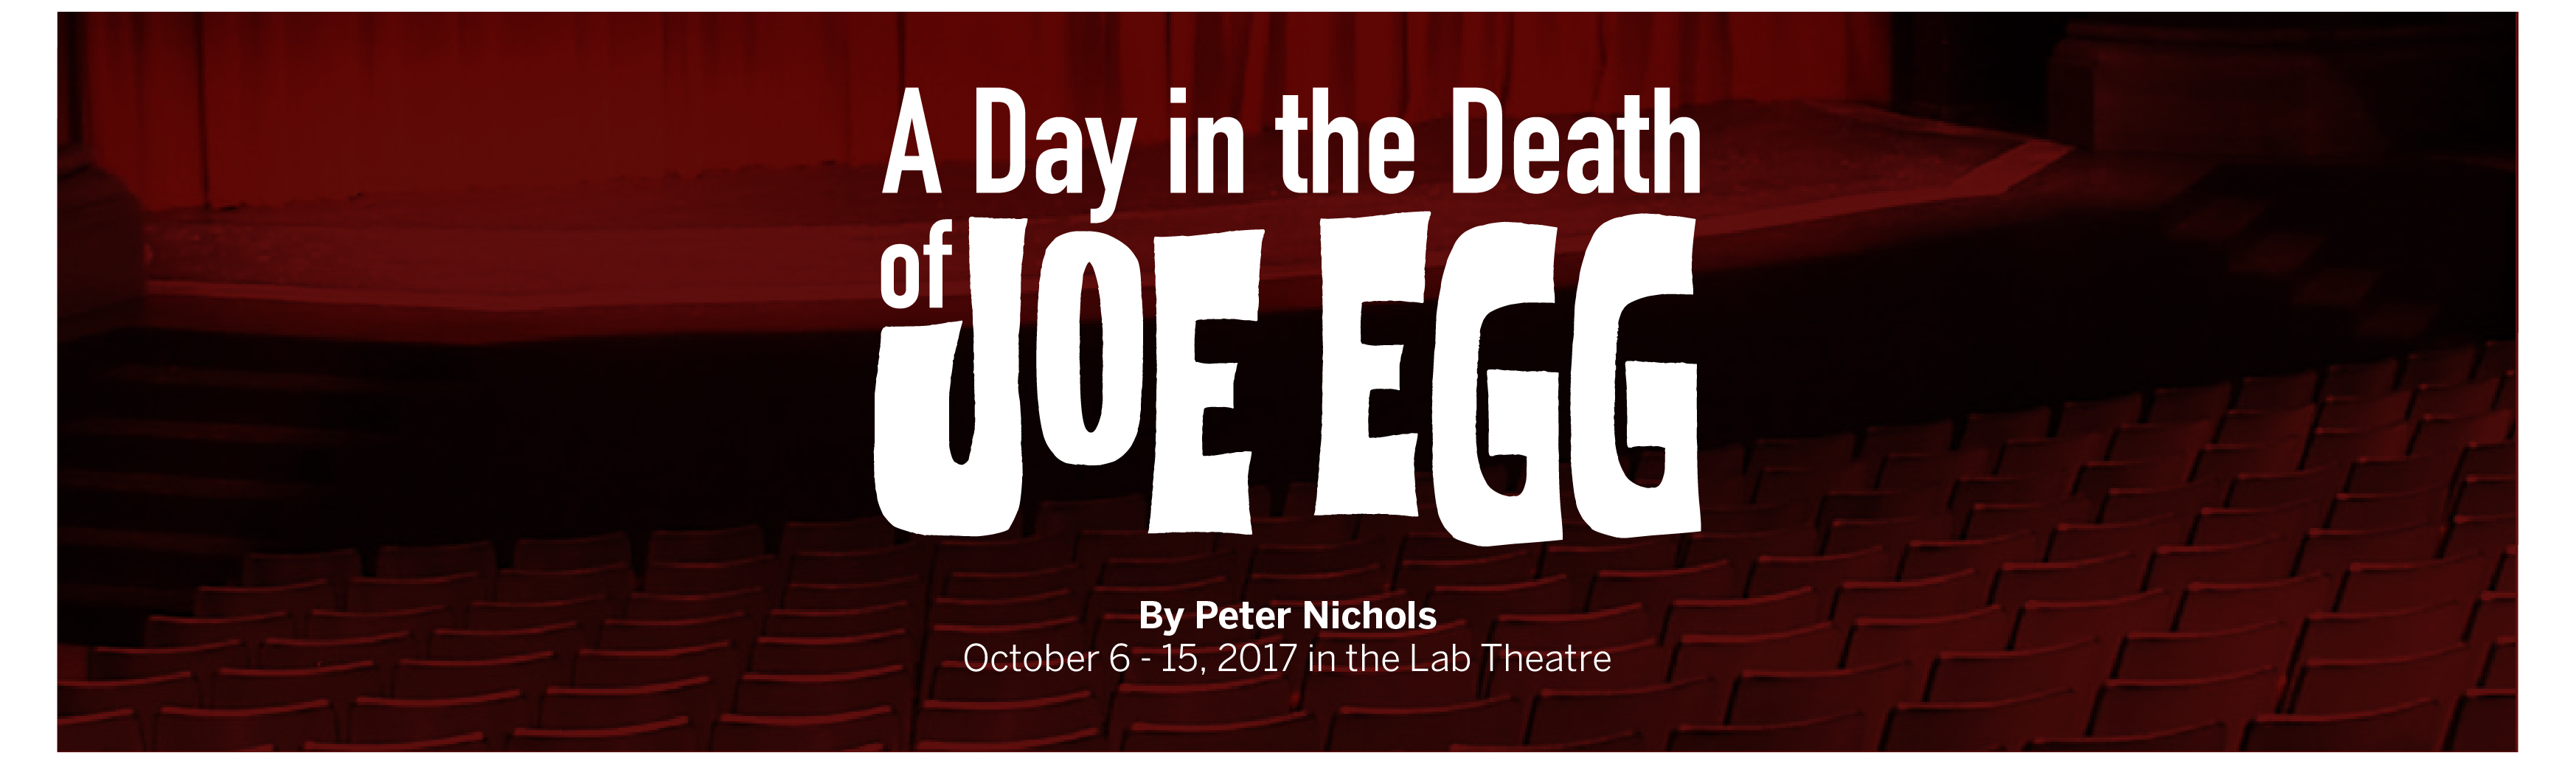 TEST - A Day in the Death of Joe Egg